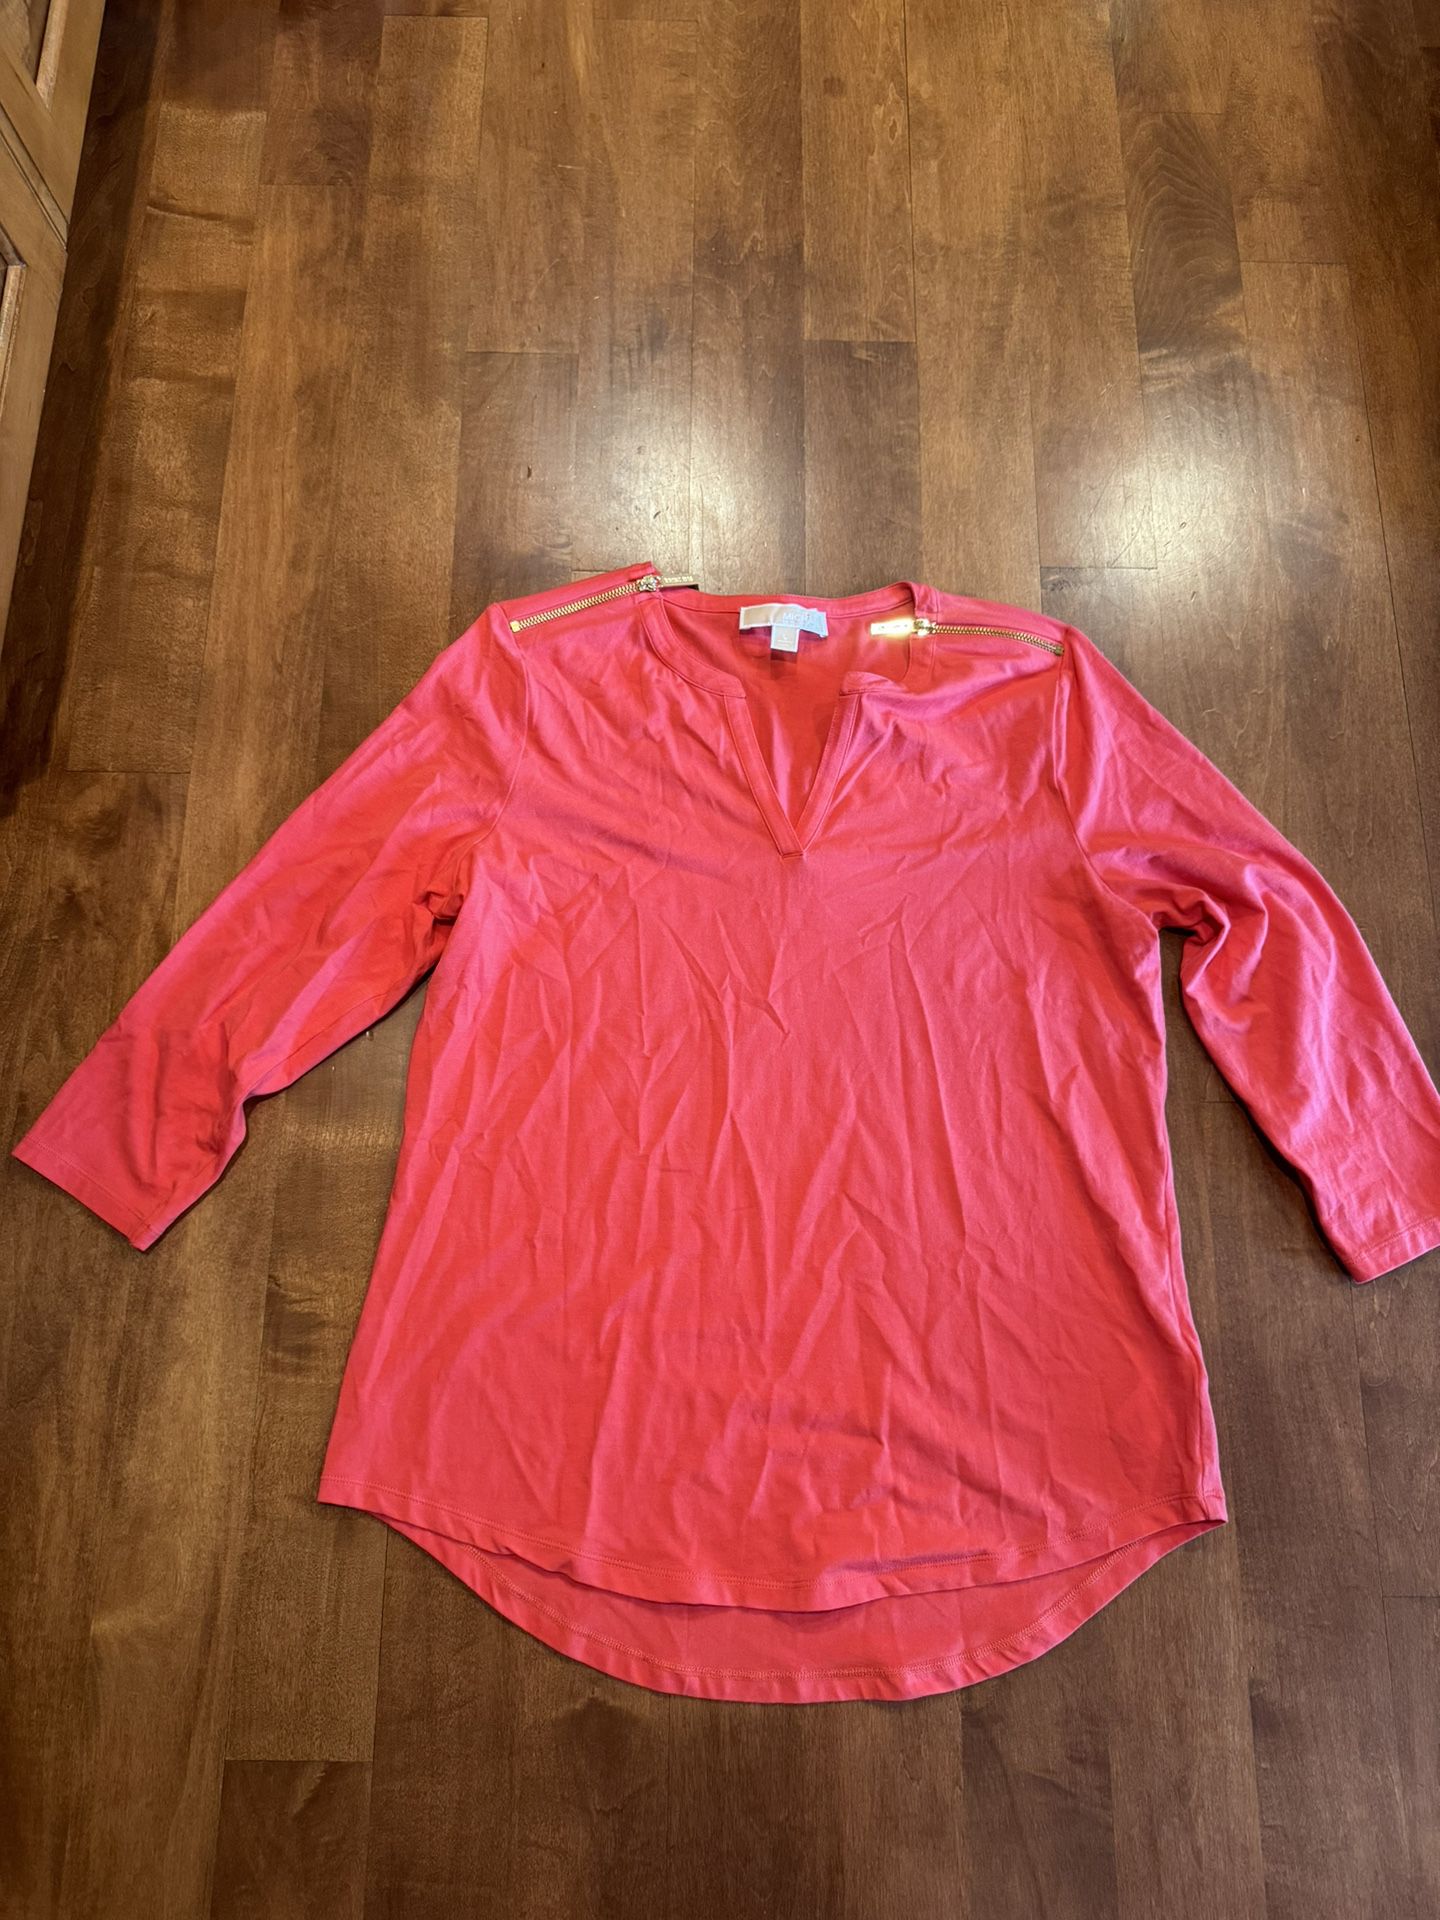 Women’s Michael Kors Top Shipping Available